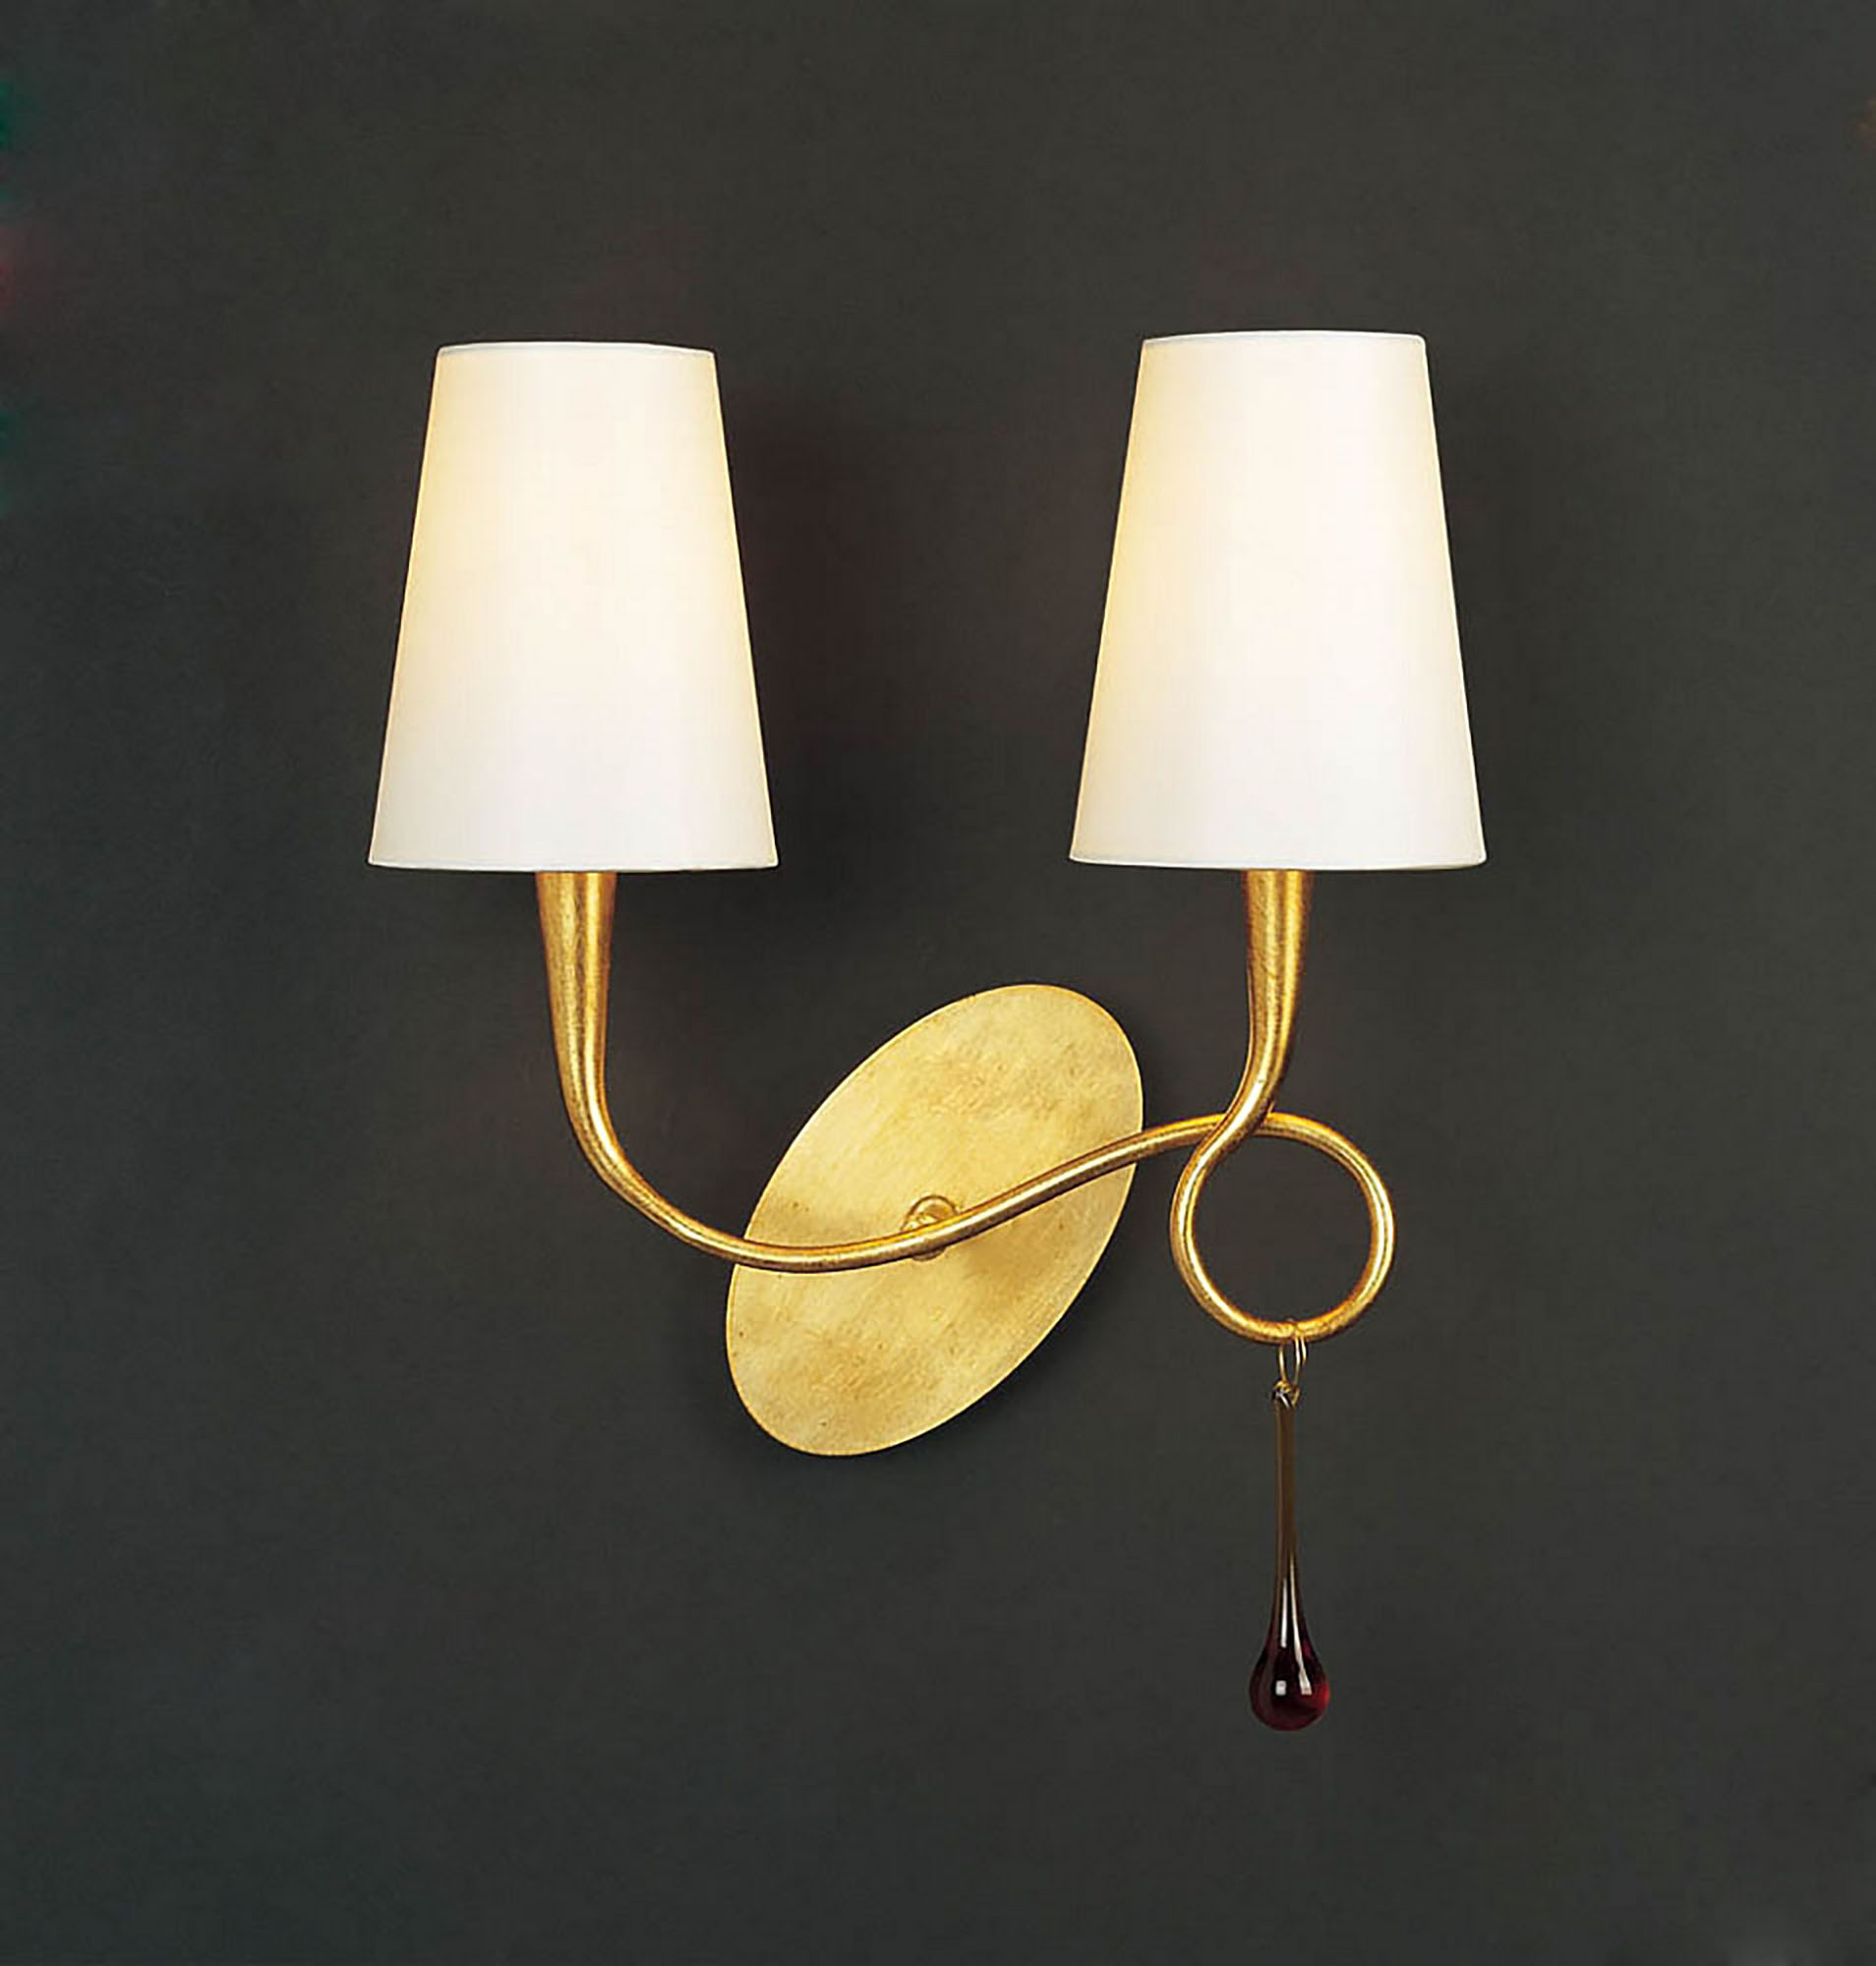 Paola Gold-Cream Wall Lights Mantra Armed Wall Lights